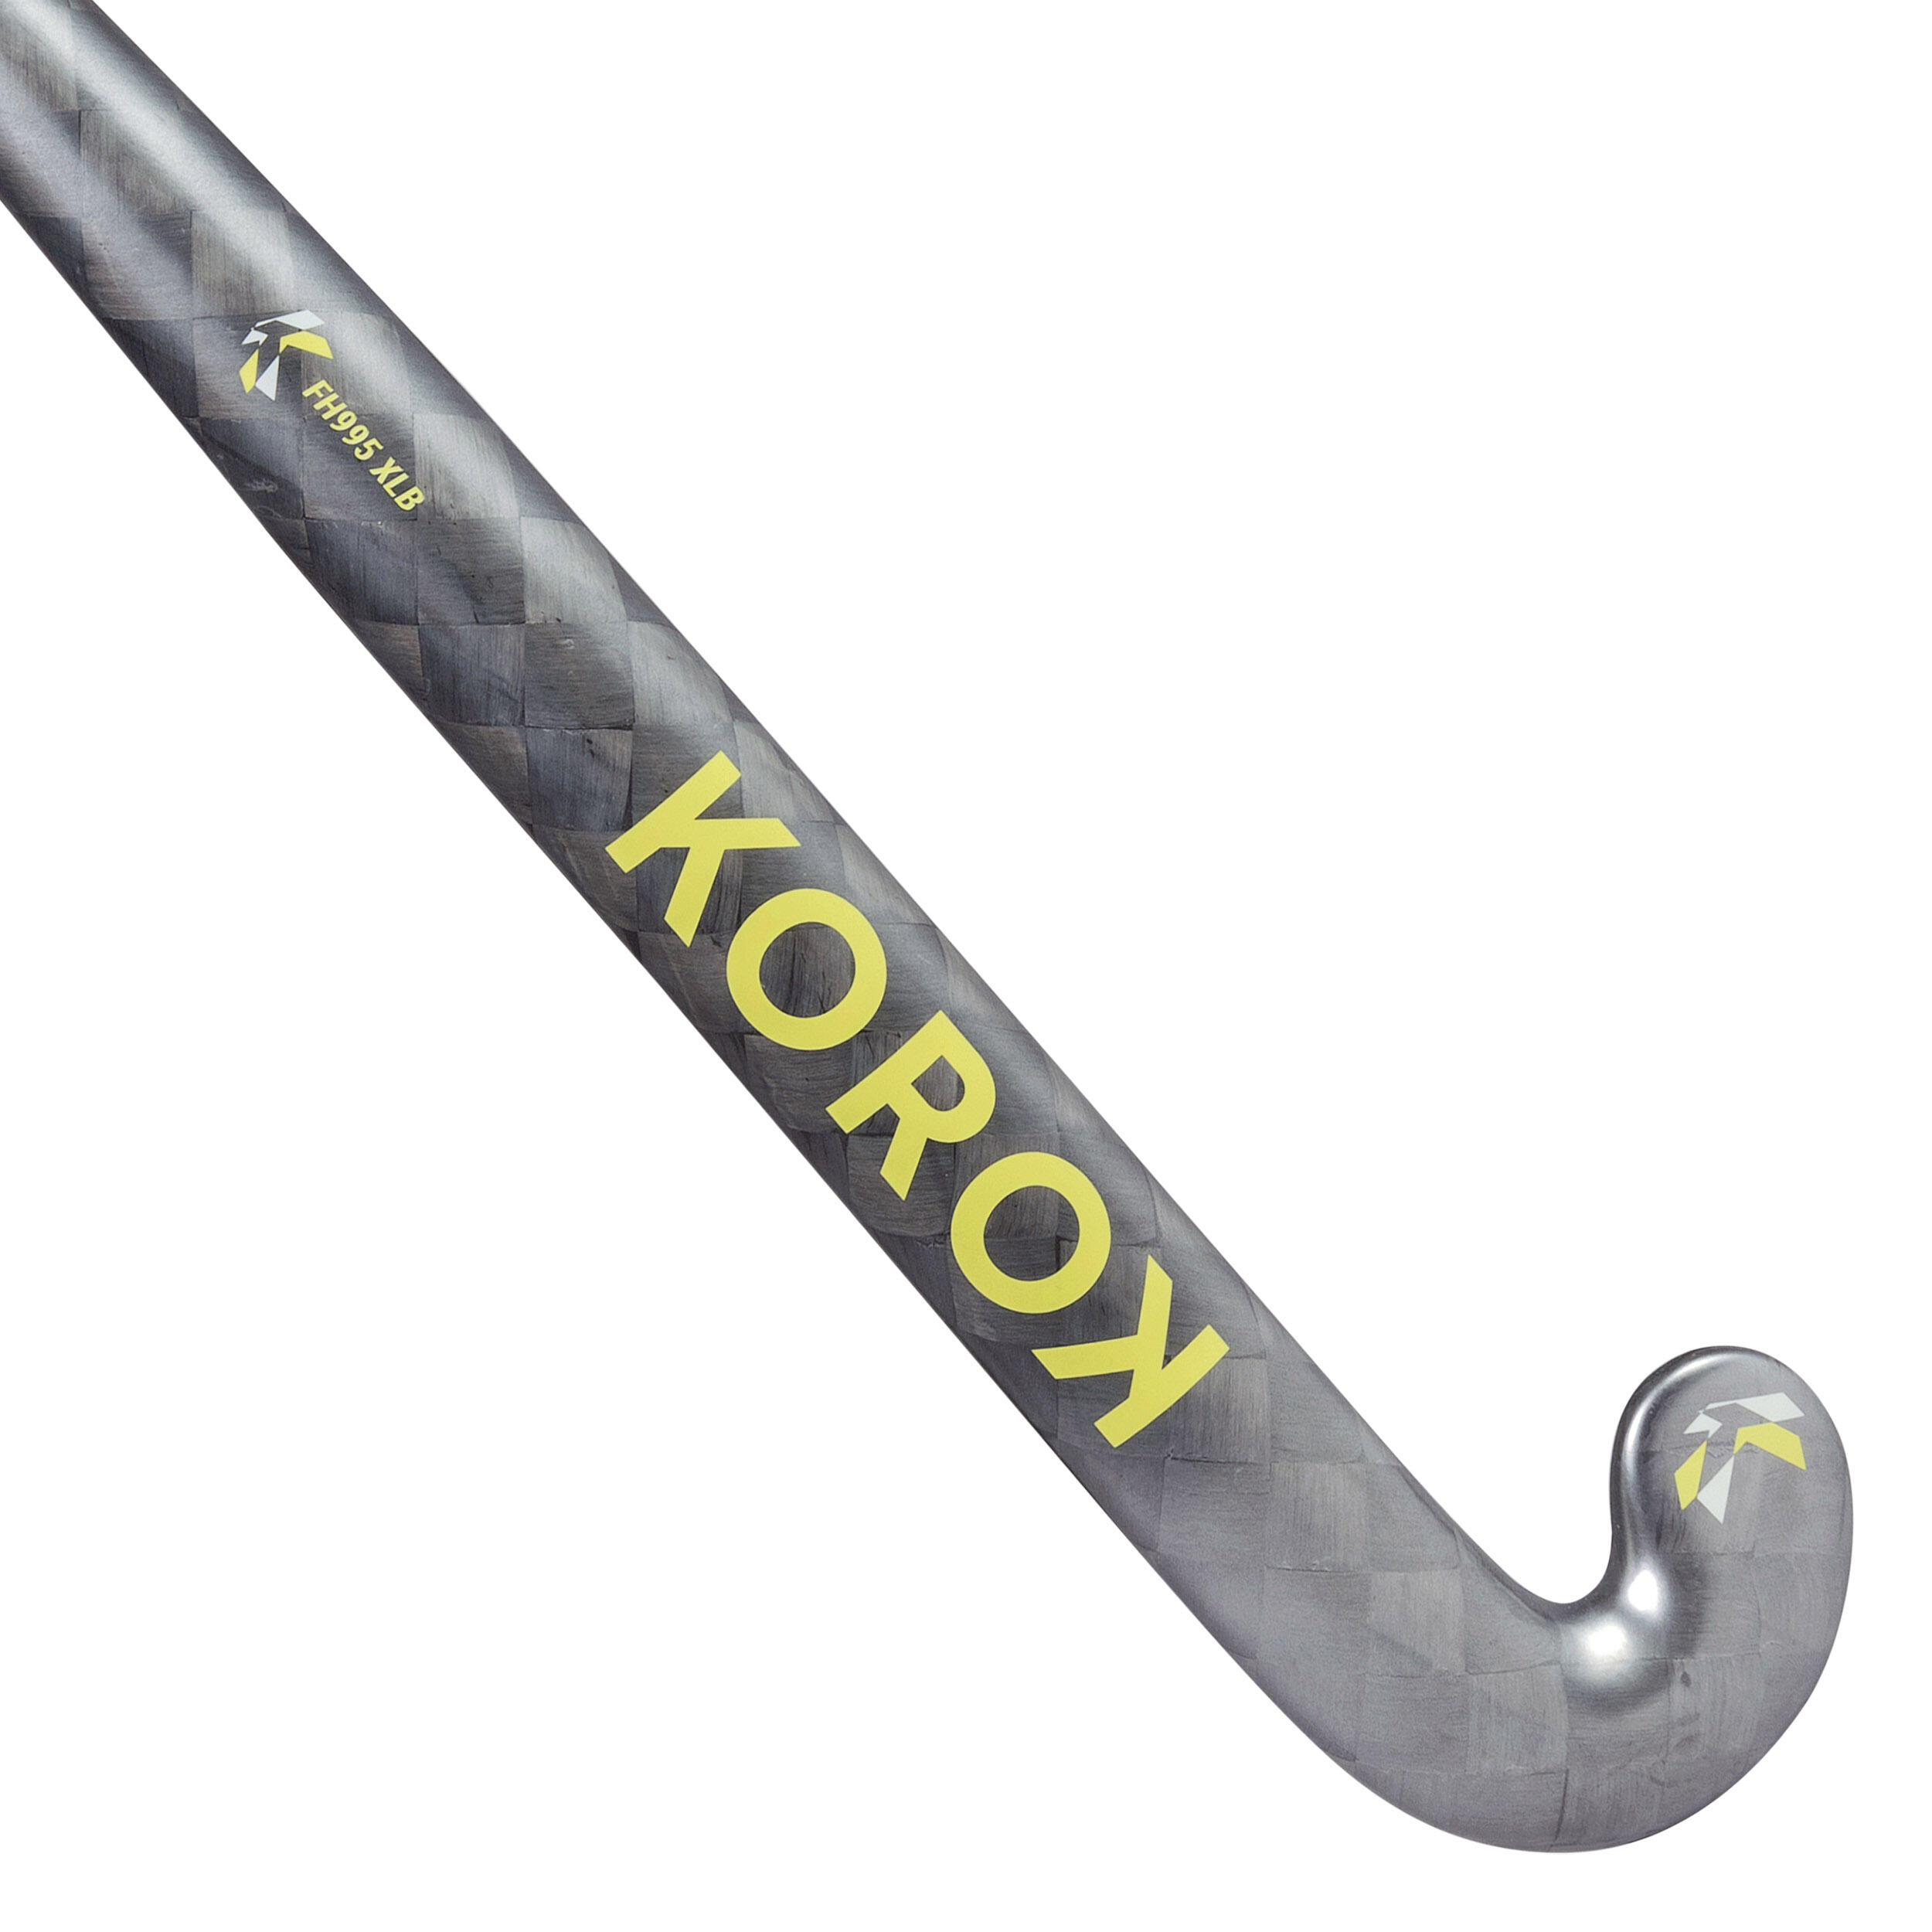 Adult Advanced 95% Carbon Extra Low Bow Field Hockey Stick FH995 - Grey/Yellow 9/12